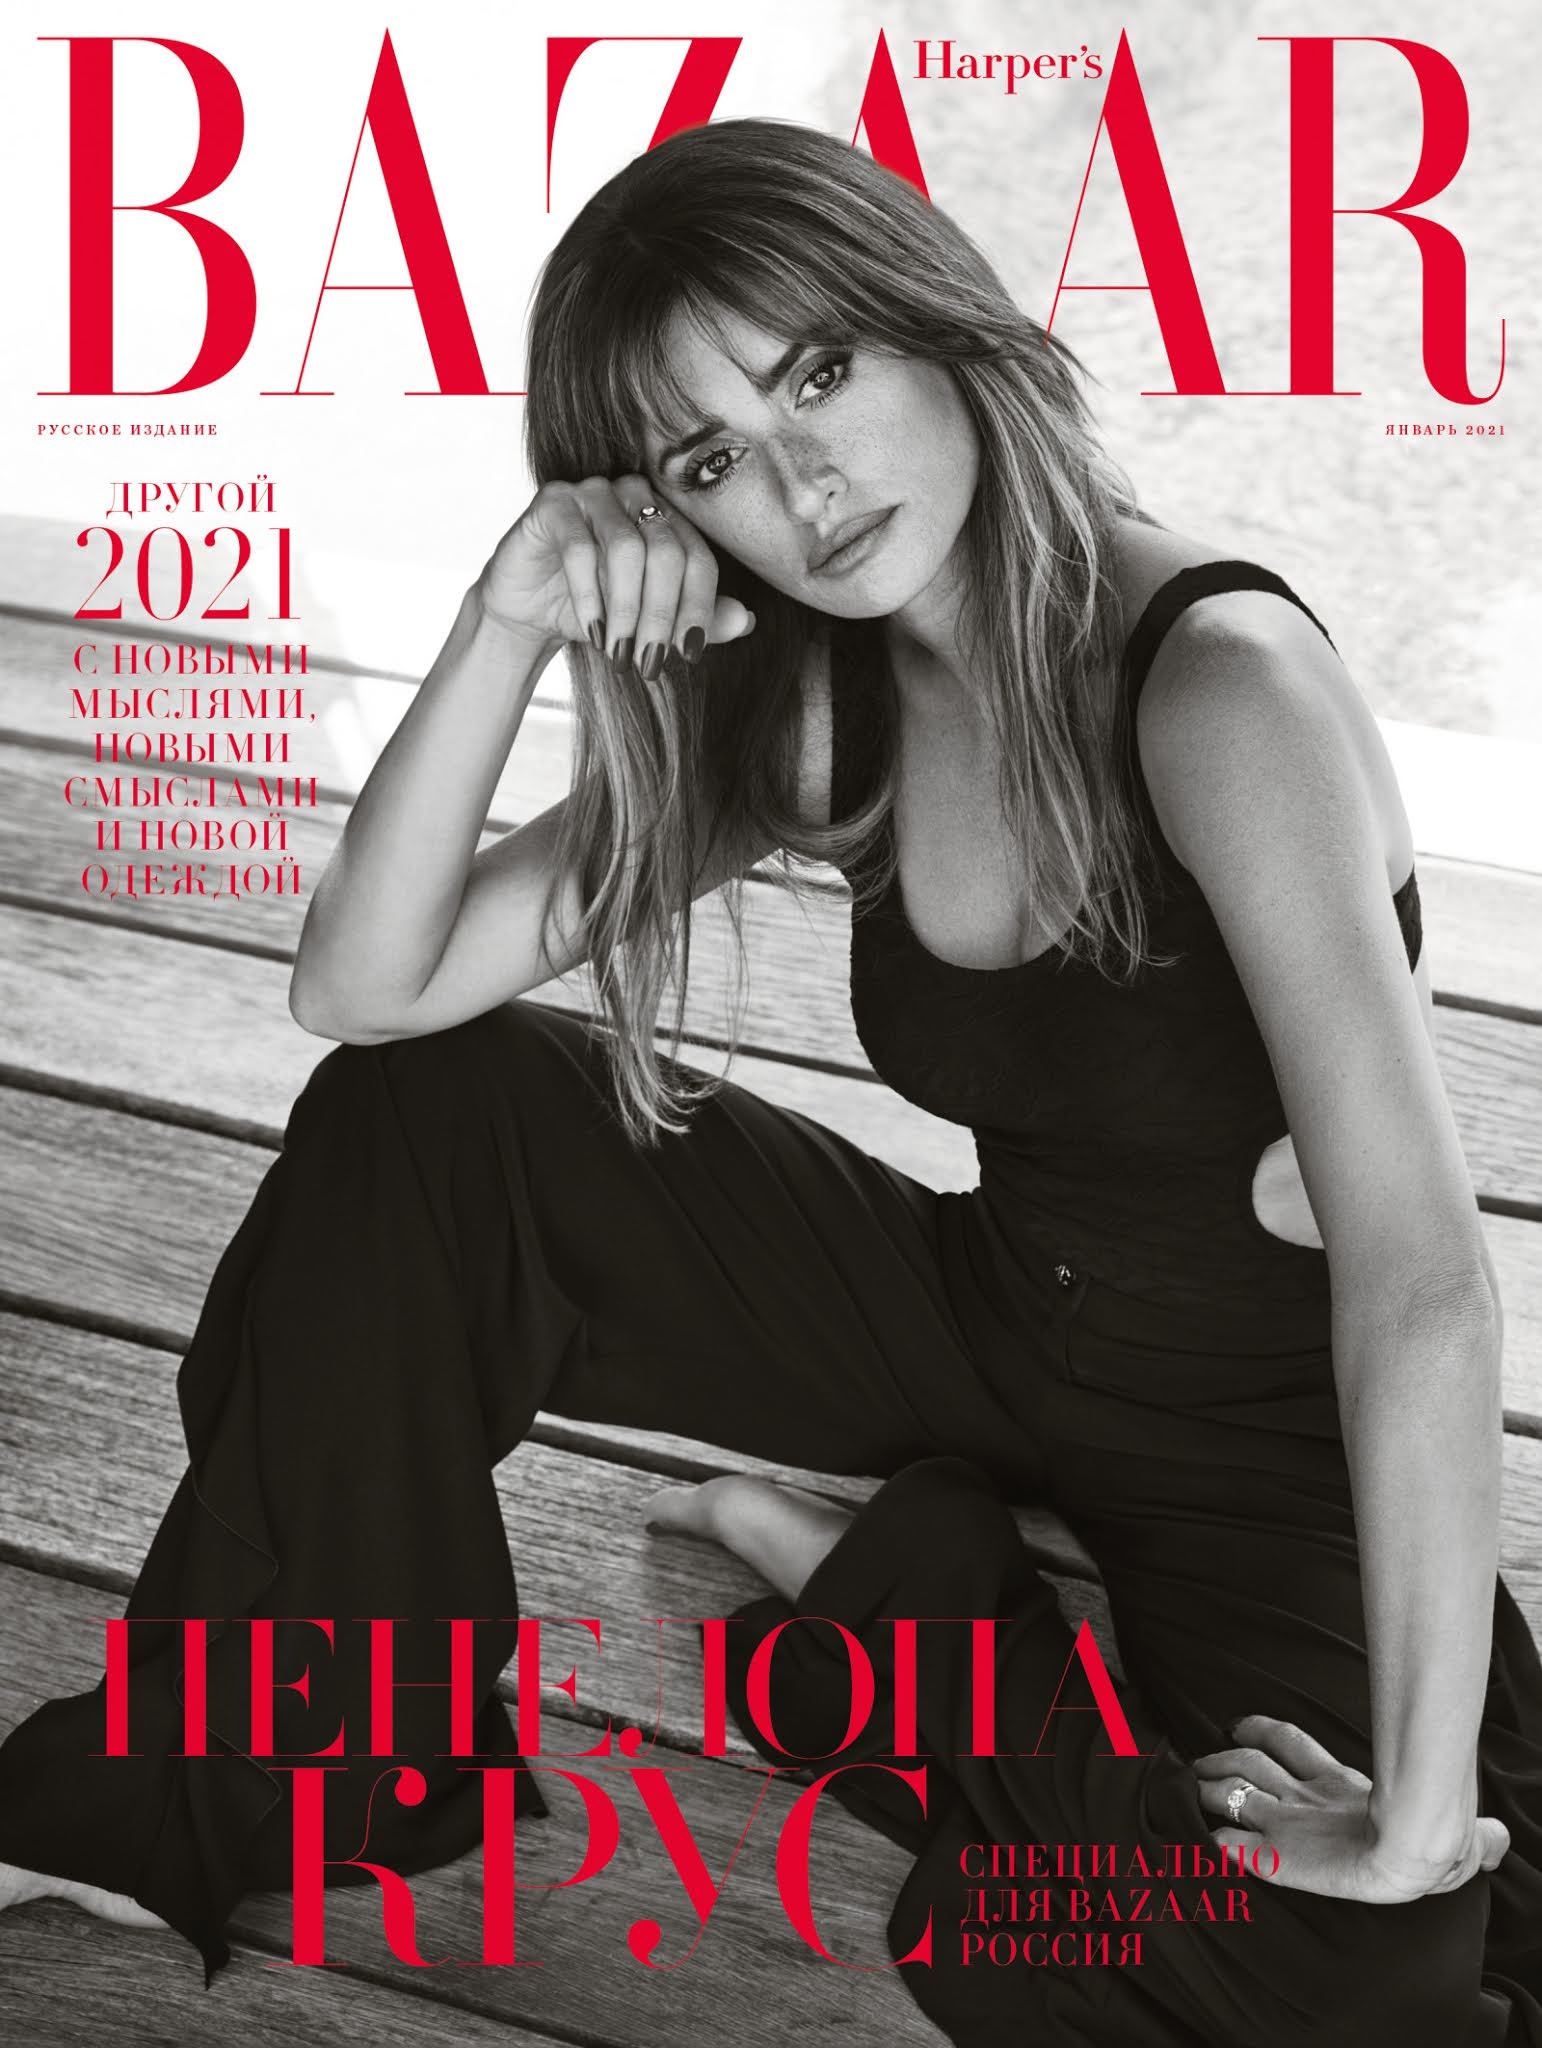 Harper's Bazaar Russia January 2021 Cover Story Editorial